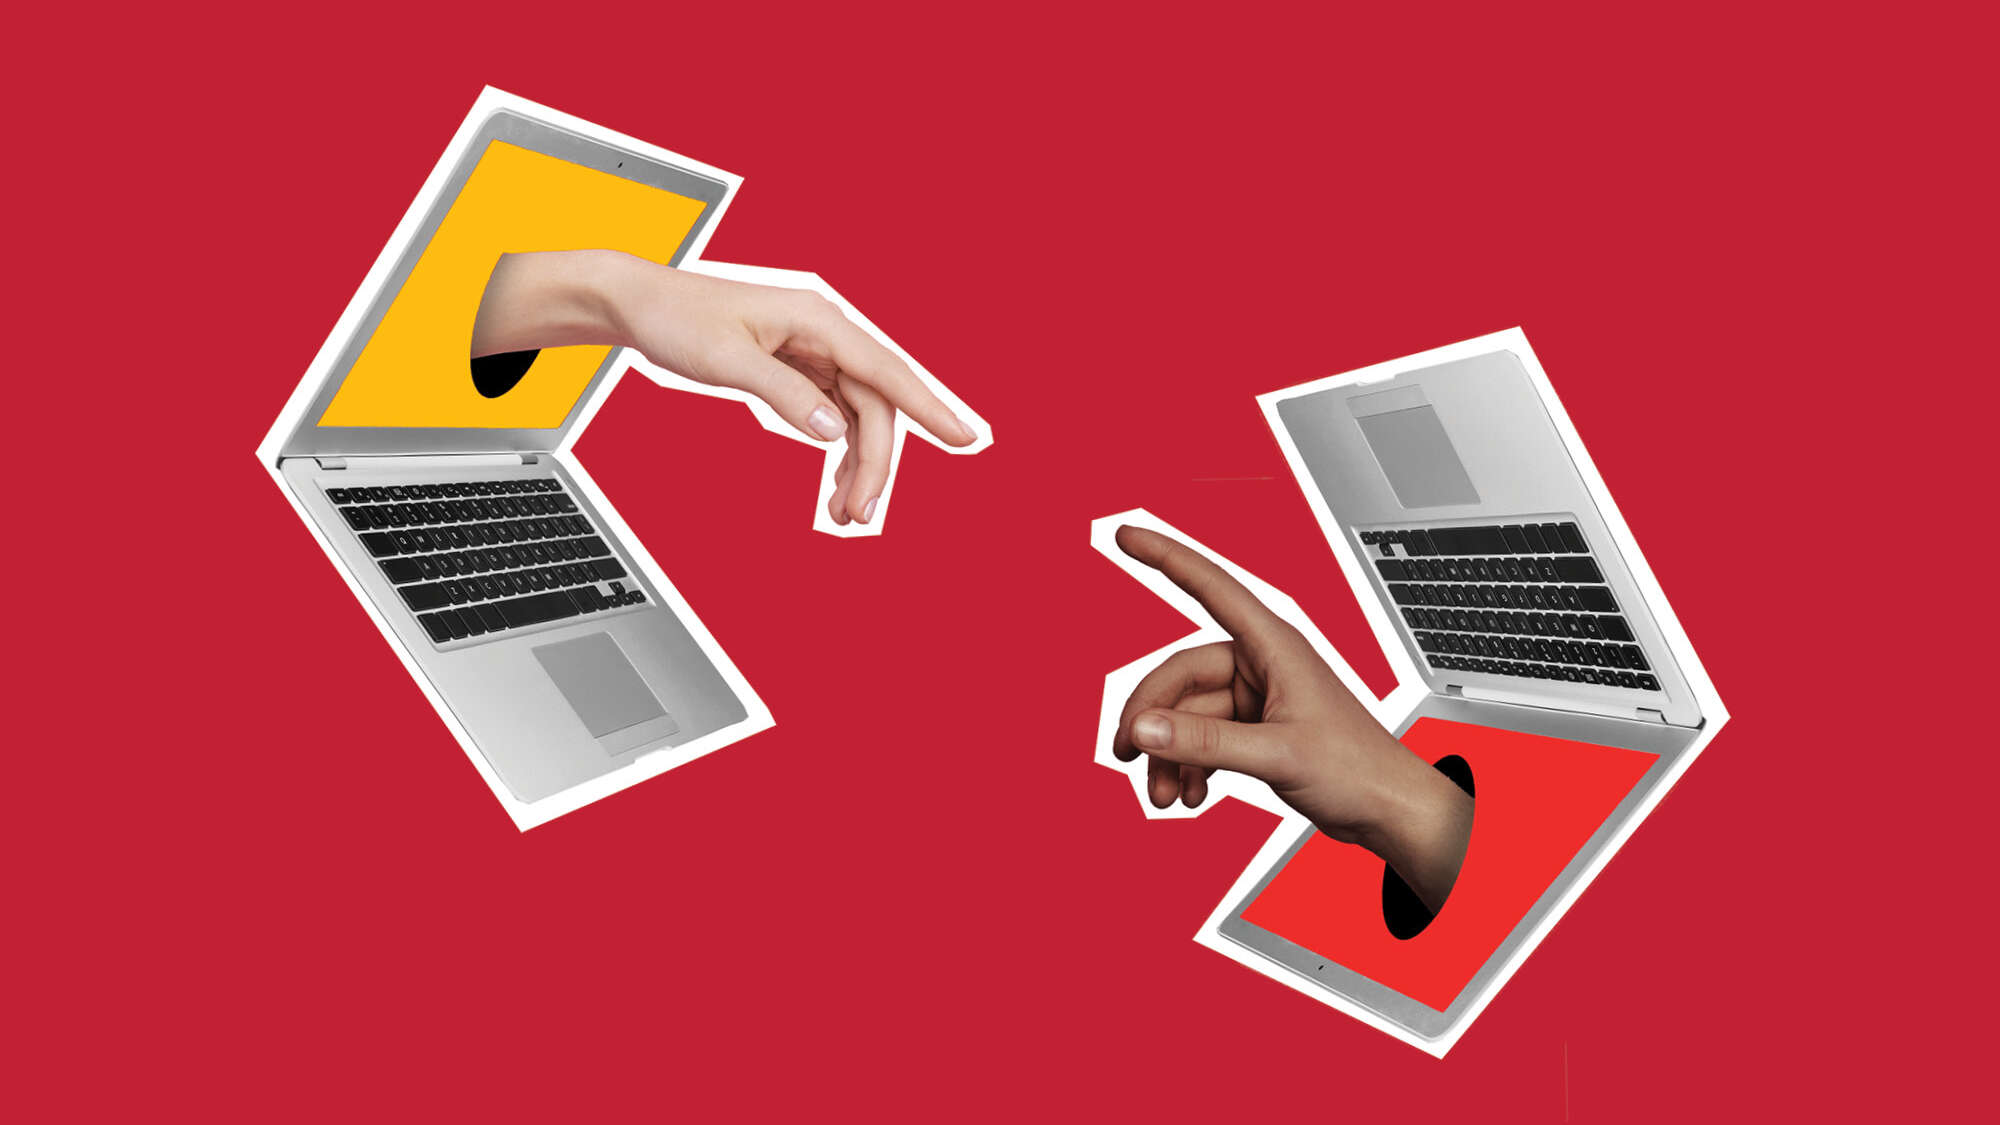 two laptop two hands reaching out of the screens toward each other